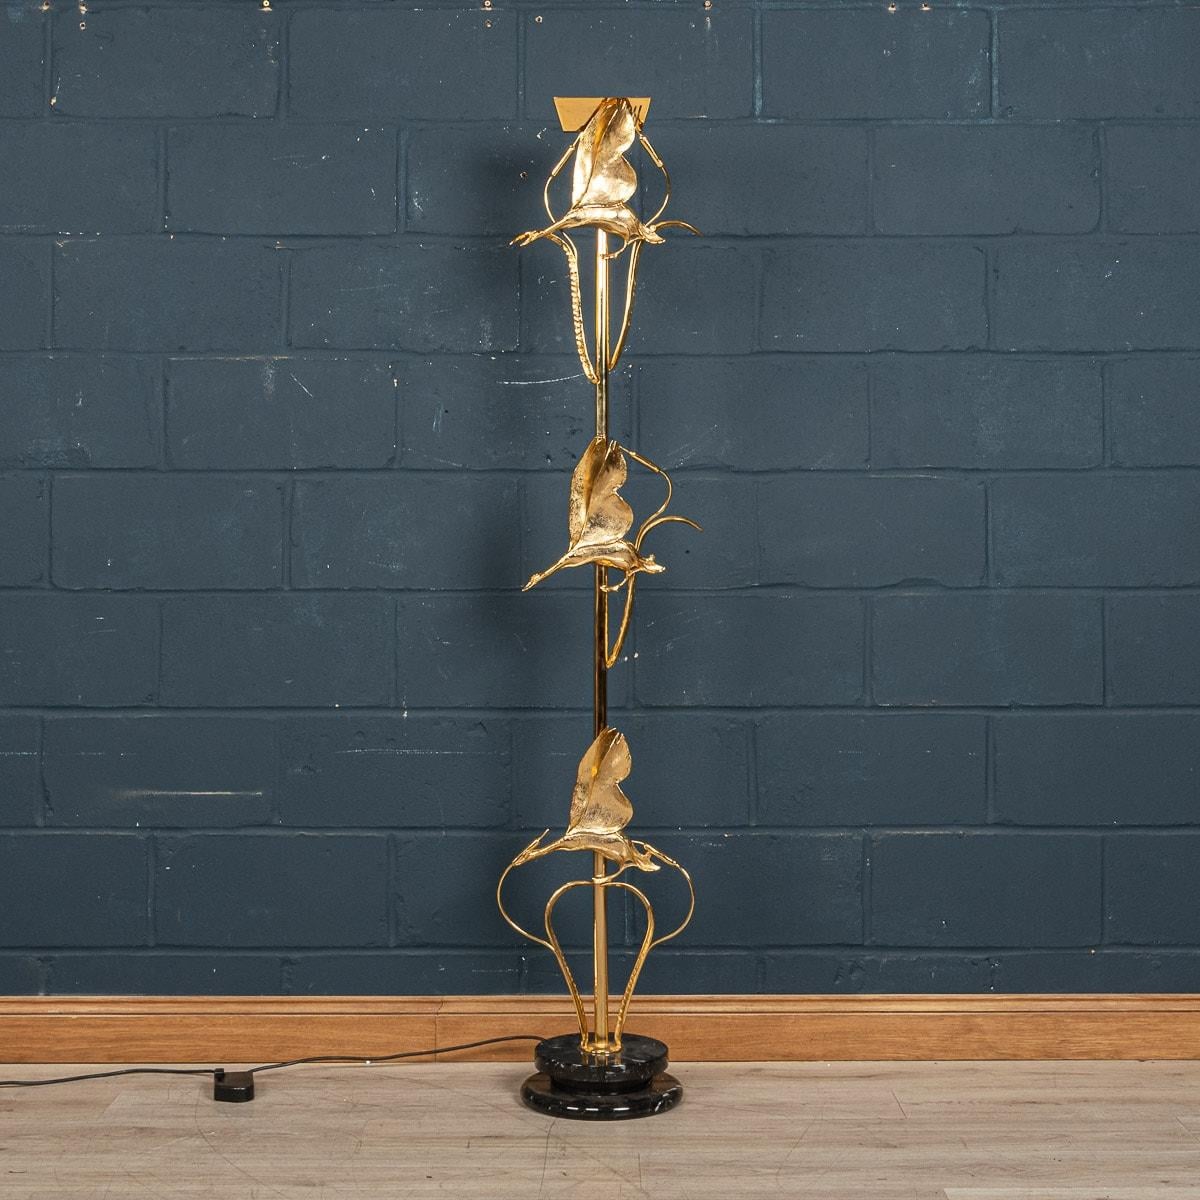 A exceptional late 1970s / early 1980s Hollywood Regency floor lamp by Lanciotto Galeotti for L' Originale, in Florence, Italy. An extremely high quality gilded bronze and brass sculpture that is mounted on a round black marble base. The stem of the